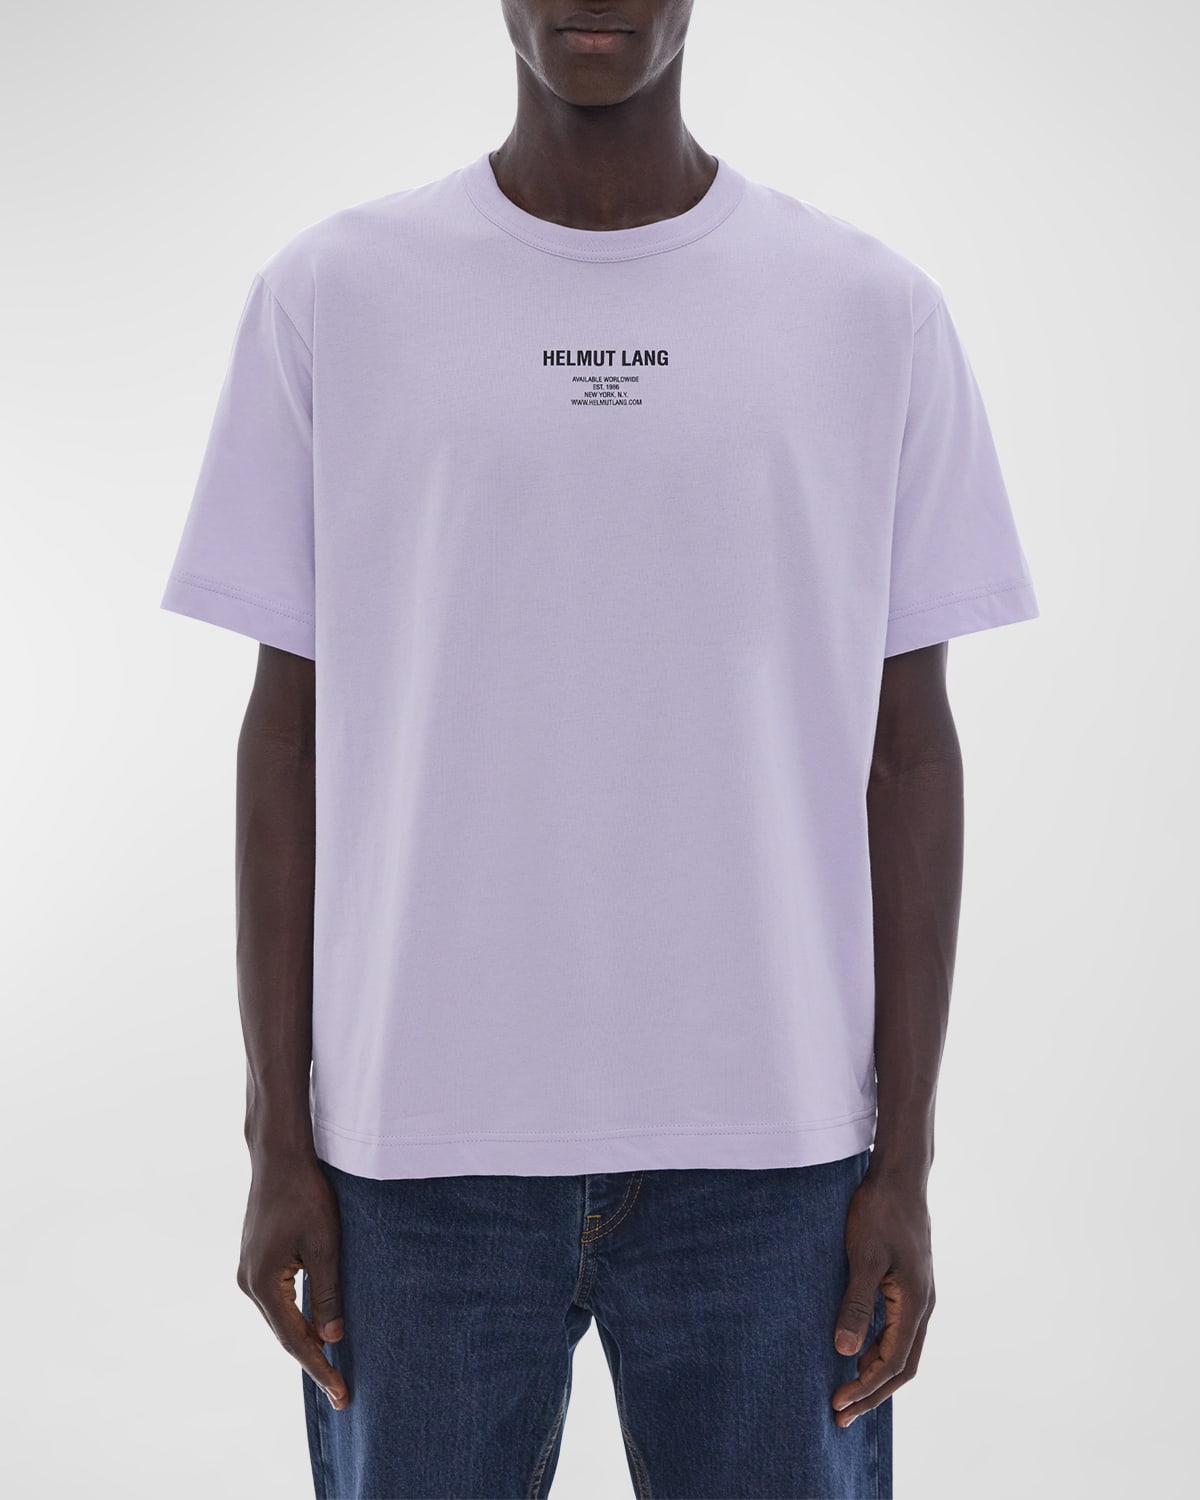 Helmut Lang Short Sleeve Crewneck Graphic Tee In Lilac